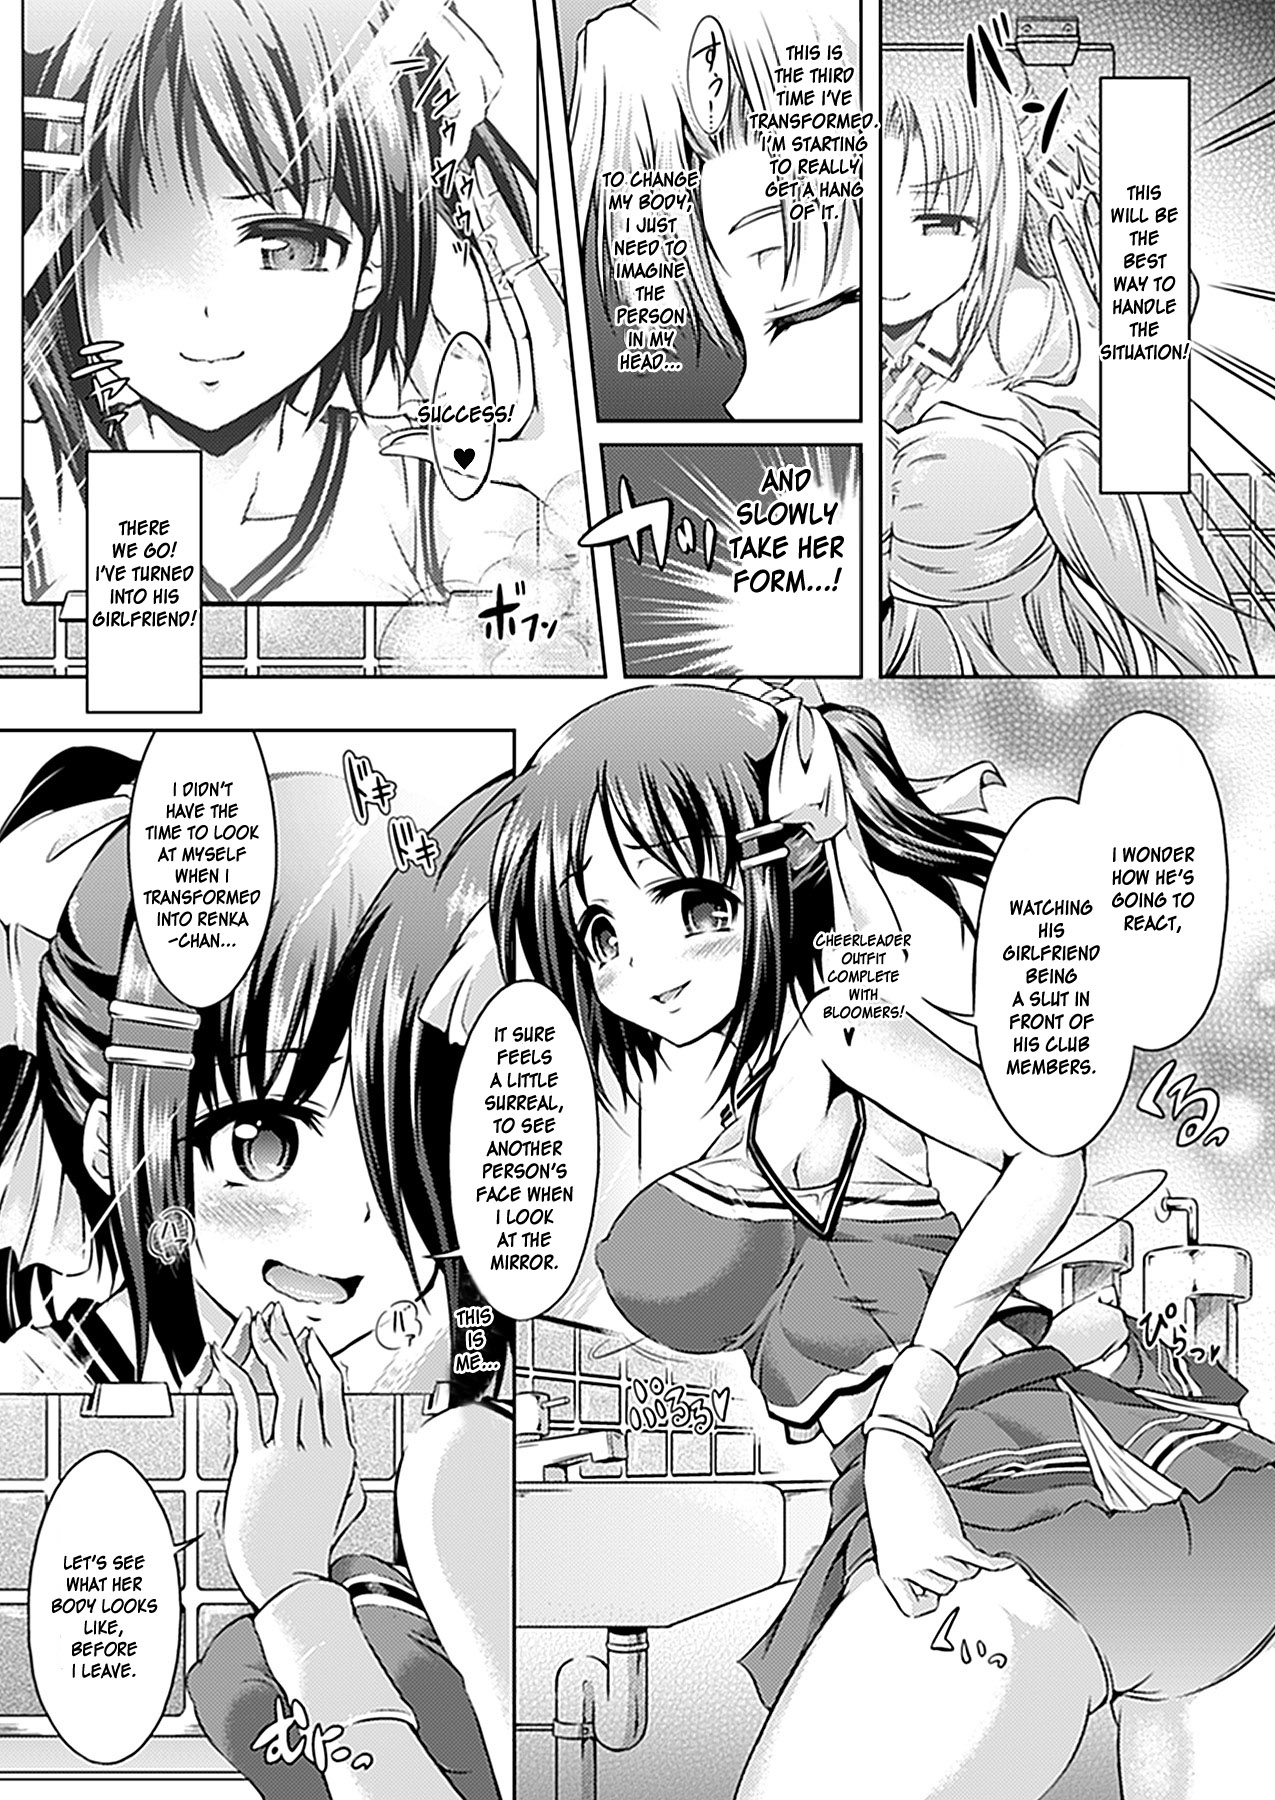 [Taniguchi-san] Transform into Anything, Anywhere Ch. 1-2 [Eng] {doujin-moe.us} page 23 full